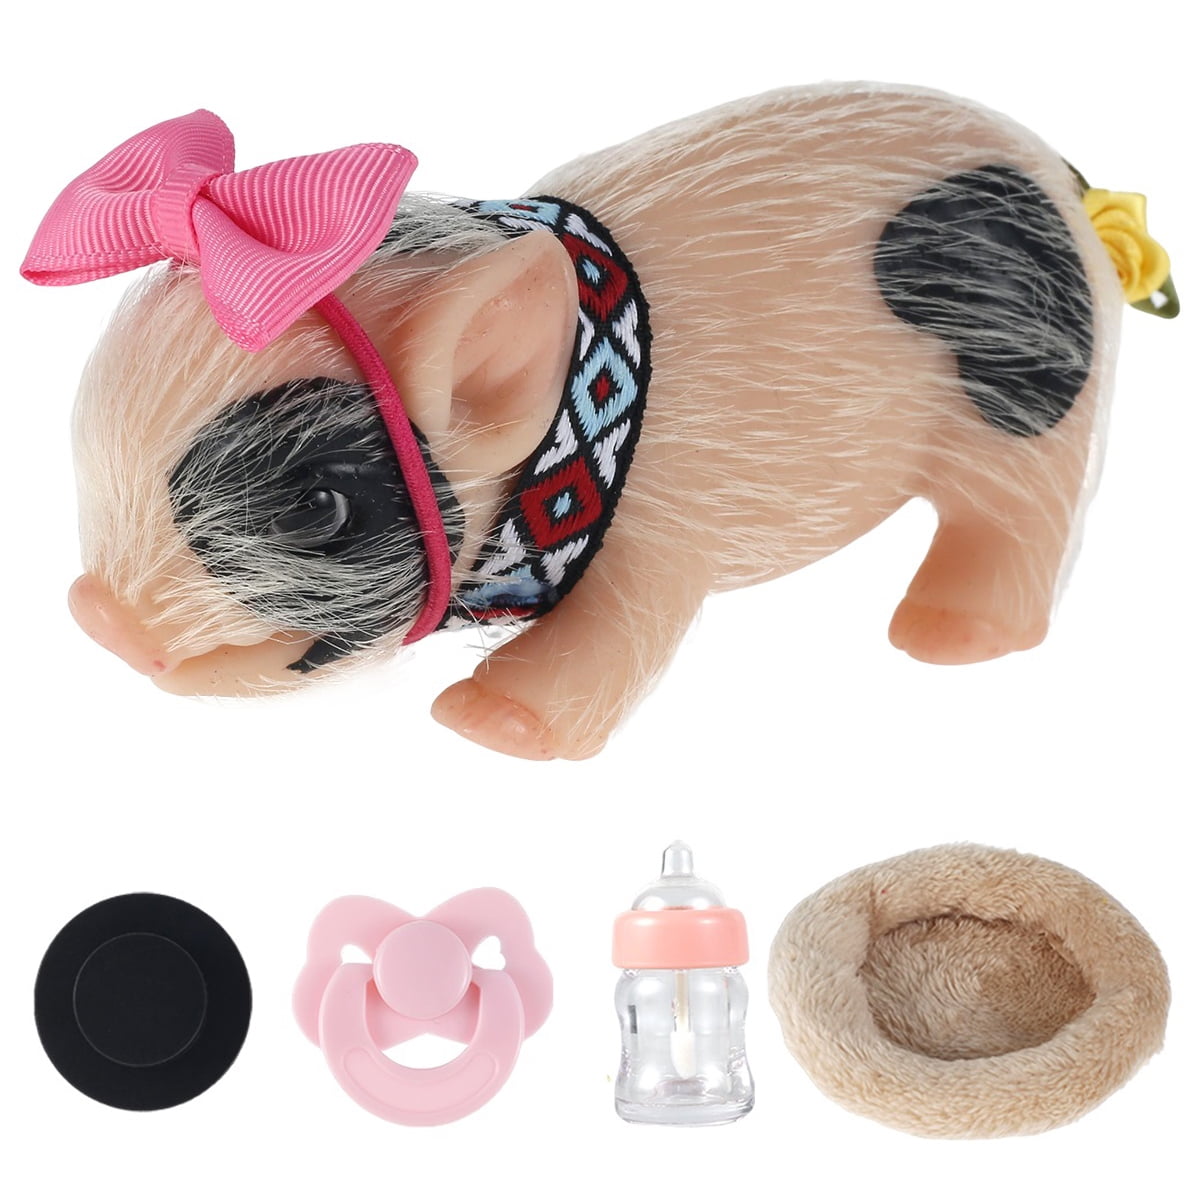 OROMYO 6Inch Silicone Pig Doll Toy Mini Soft Lifelike Silicone Pig Doll  Cute Miniature Reborn Silicone Pig Interesting Full Silicone Body Piggy  Toys with Accessories for Kids Home Decoration 